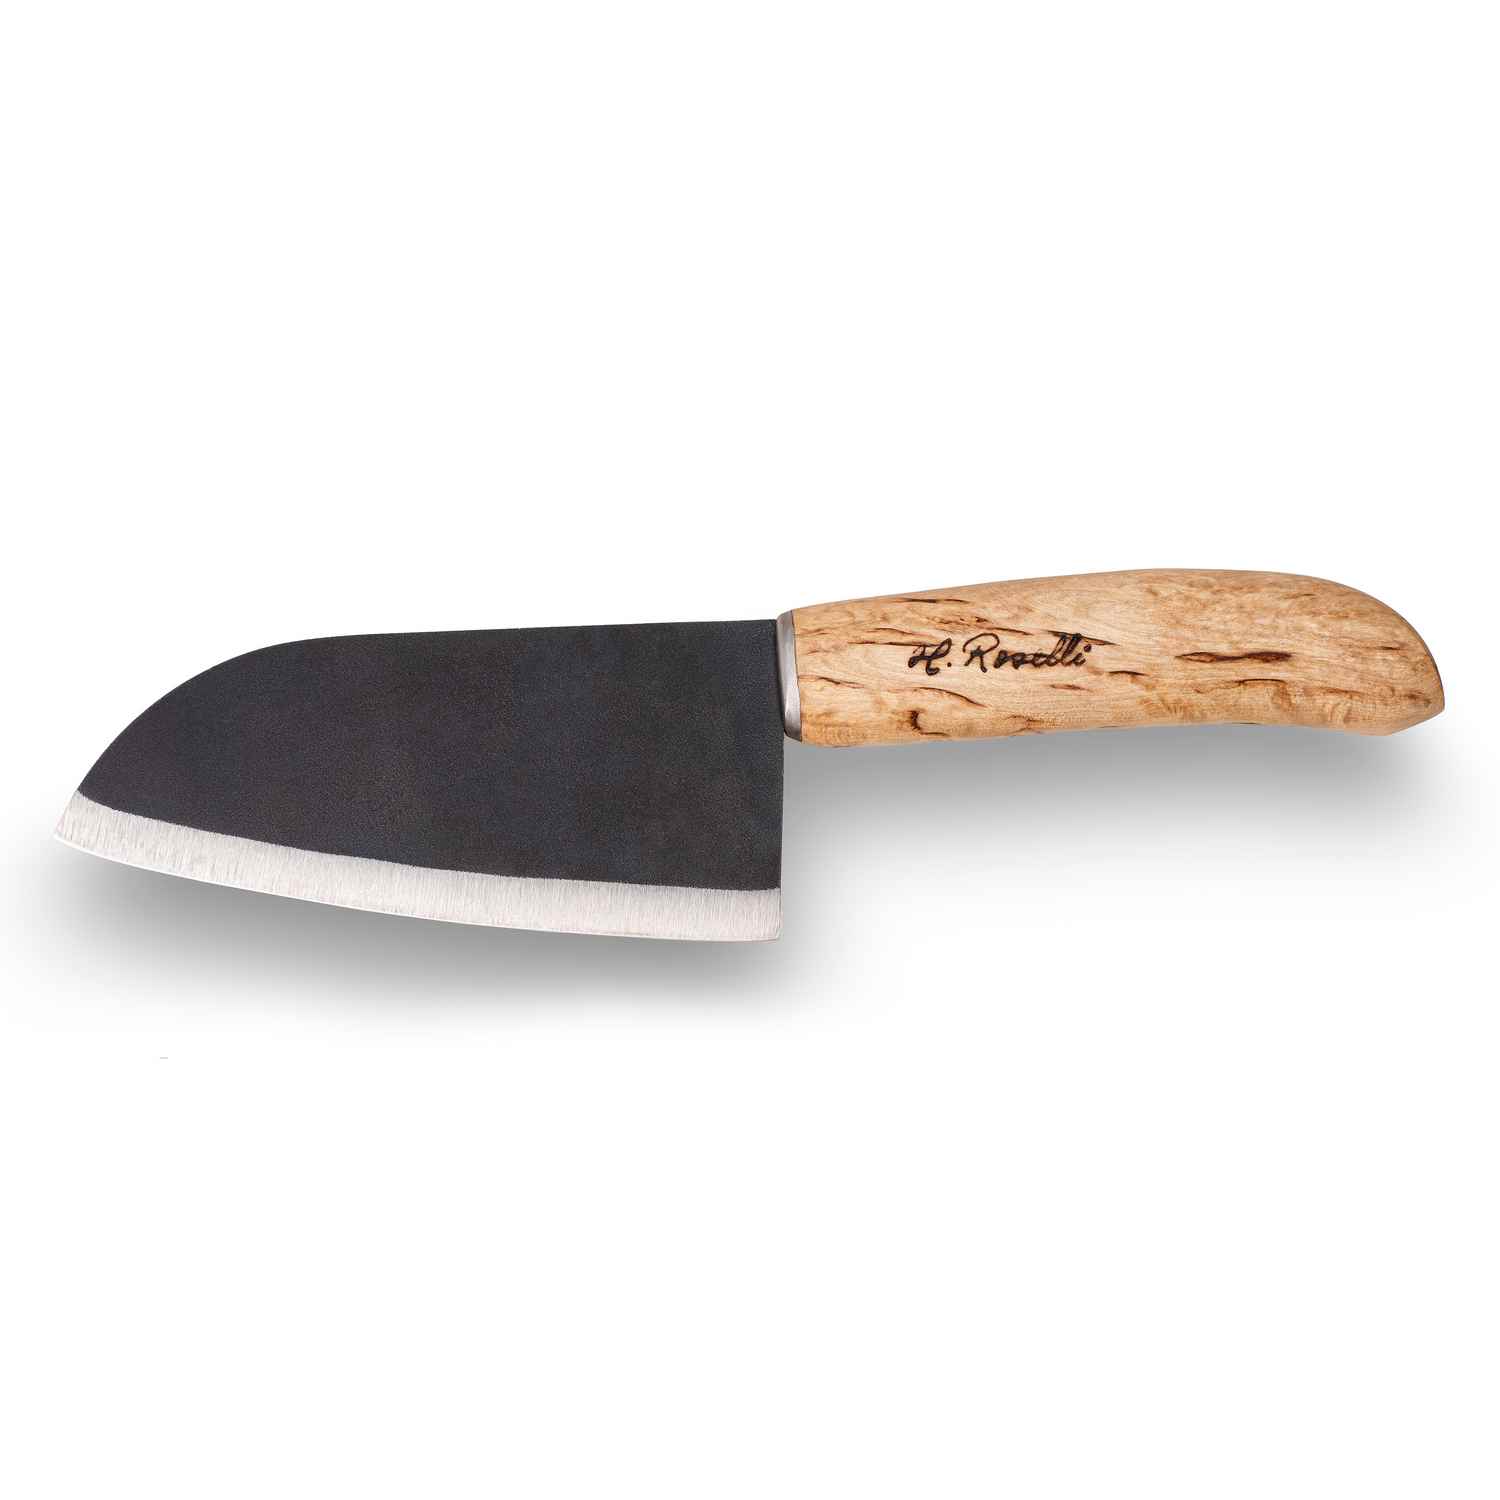 Roselli R700 "Small Chef Knife"